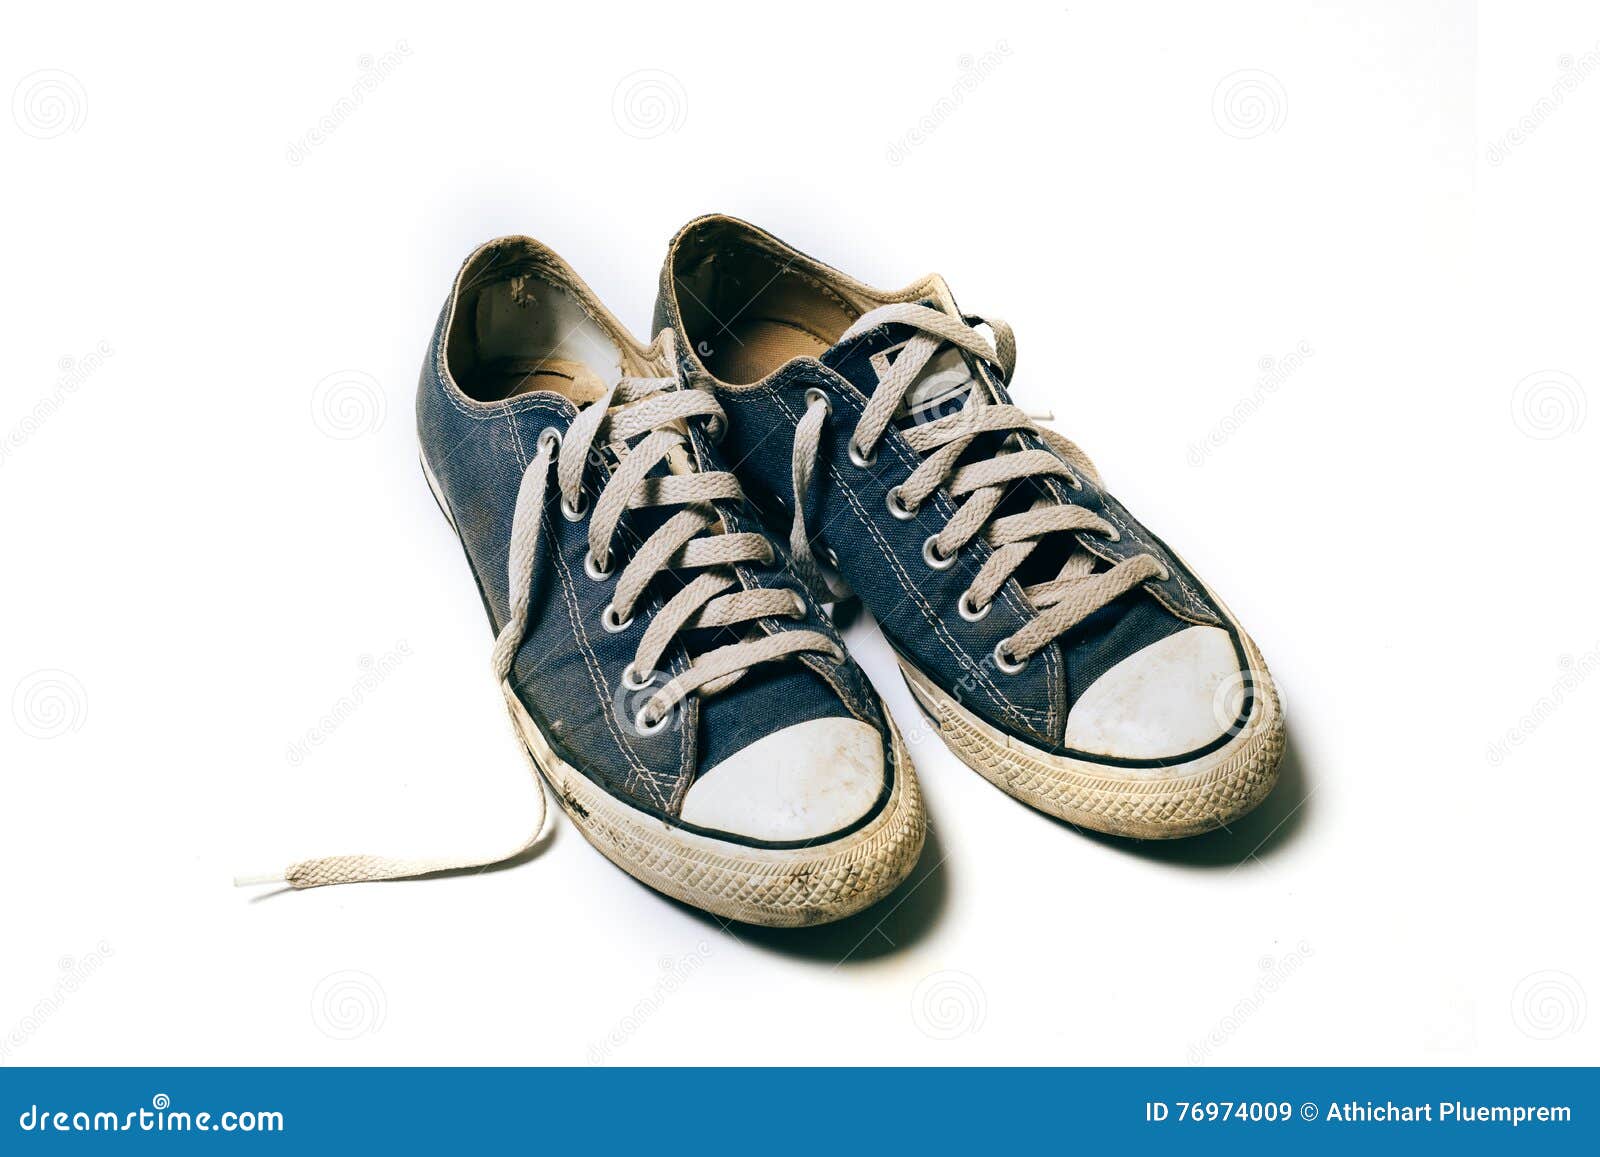 Old & Dirty Shoes Isolated on White Background Stock Image - Image of ...